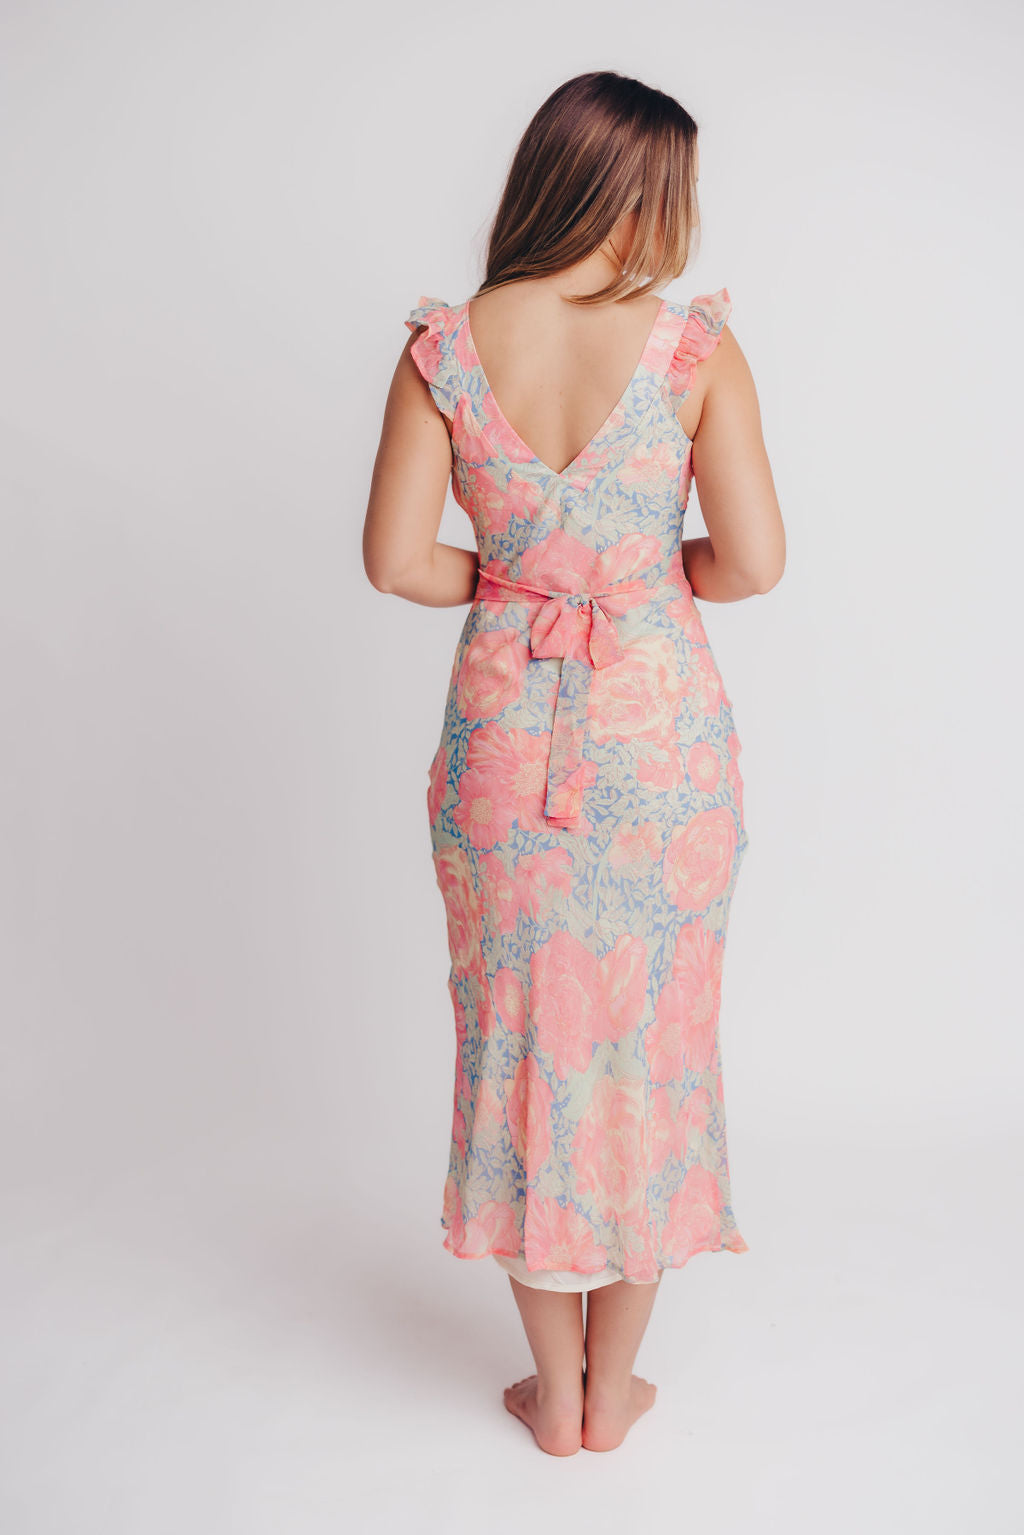 Pisa Floral Chiffon Dress with Ruffle Shoulder in Blue/Pink